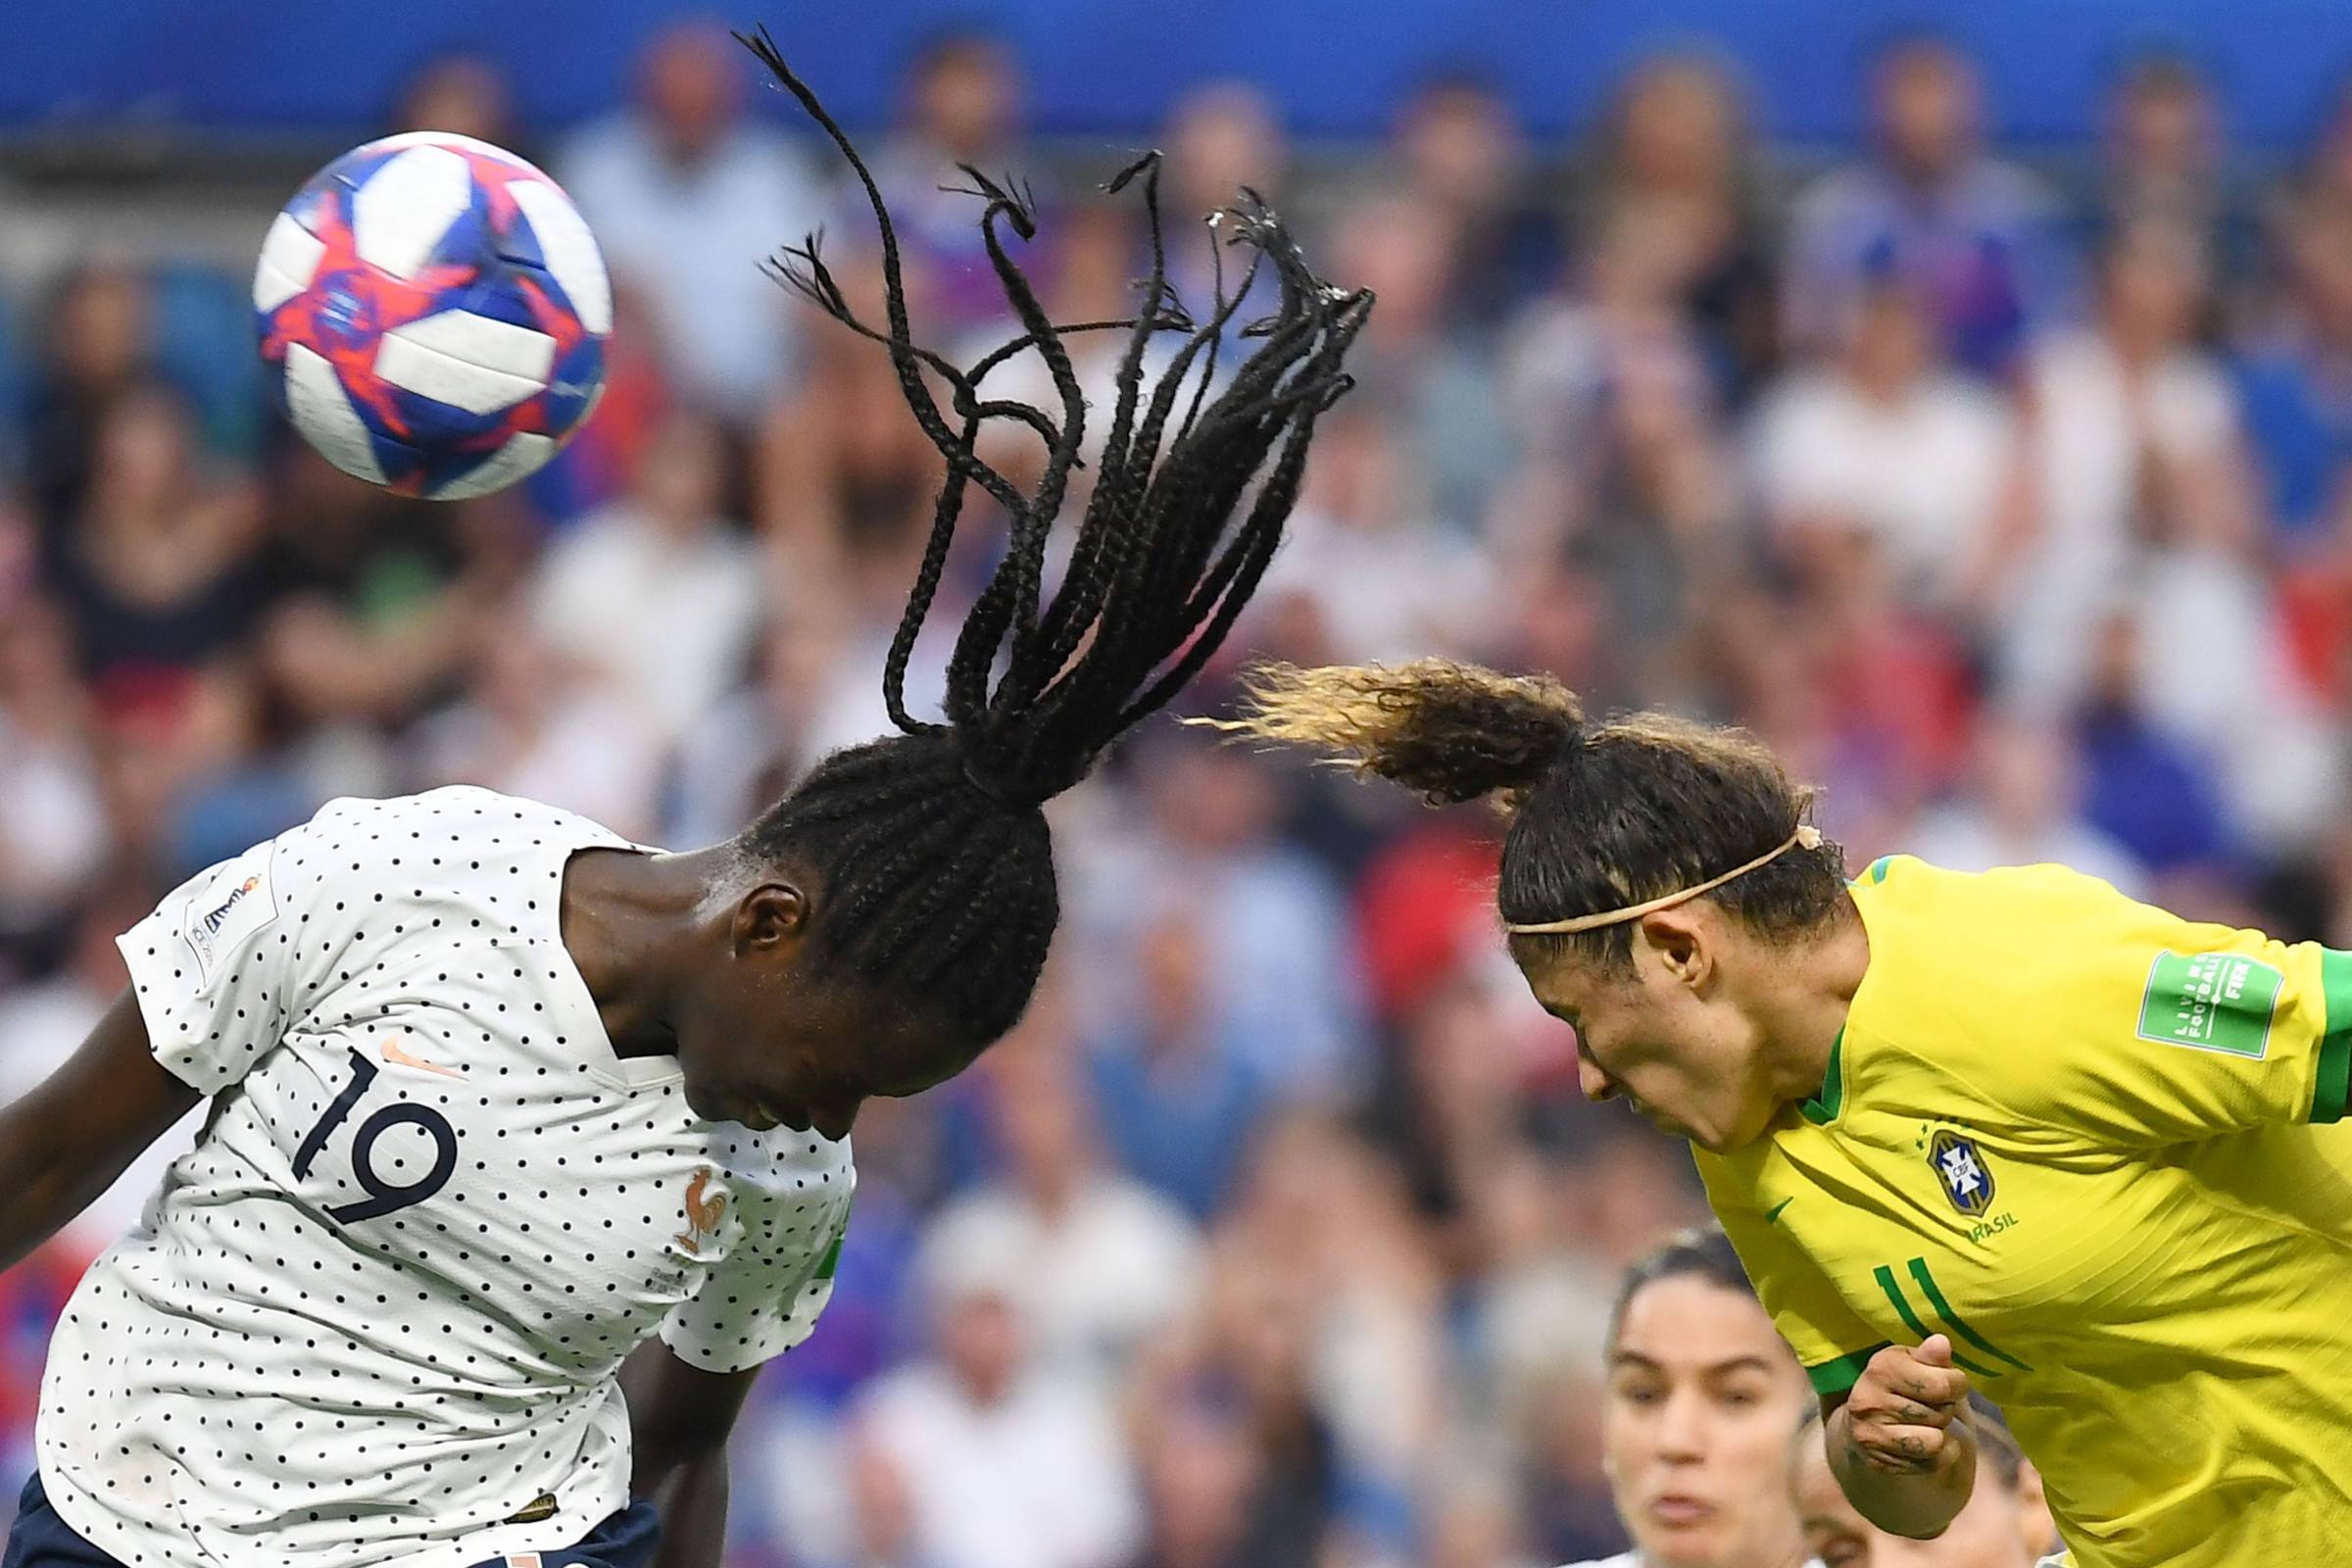 Companies will release employees in women’s World Cup games